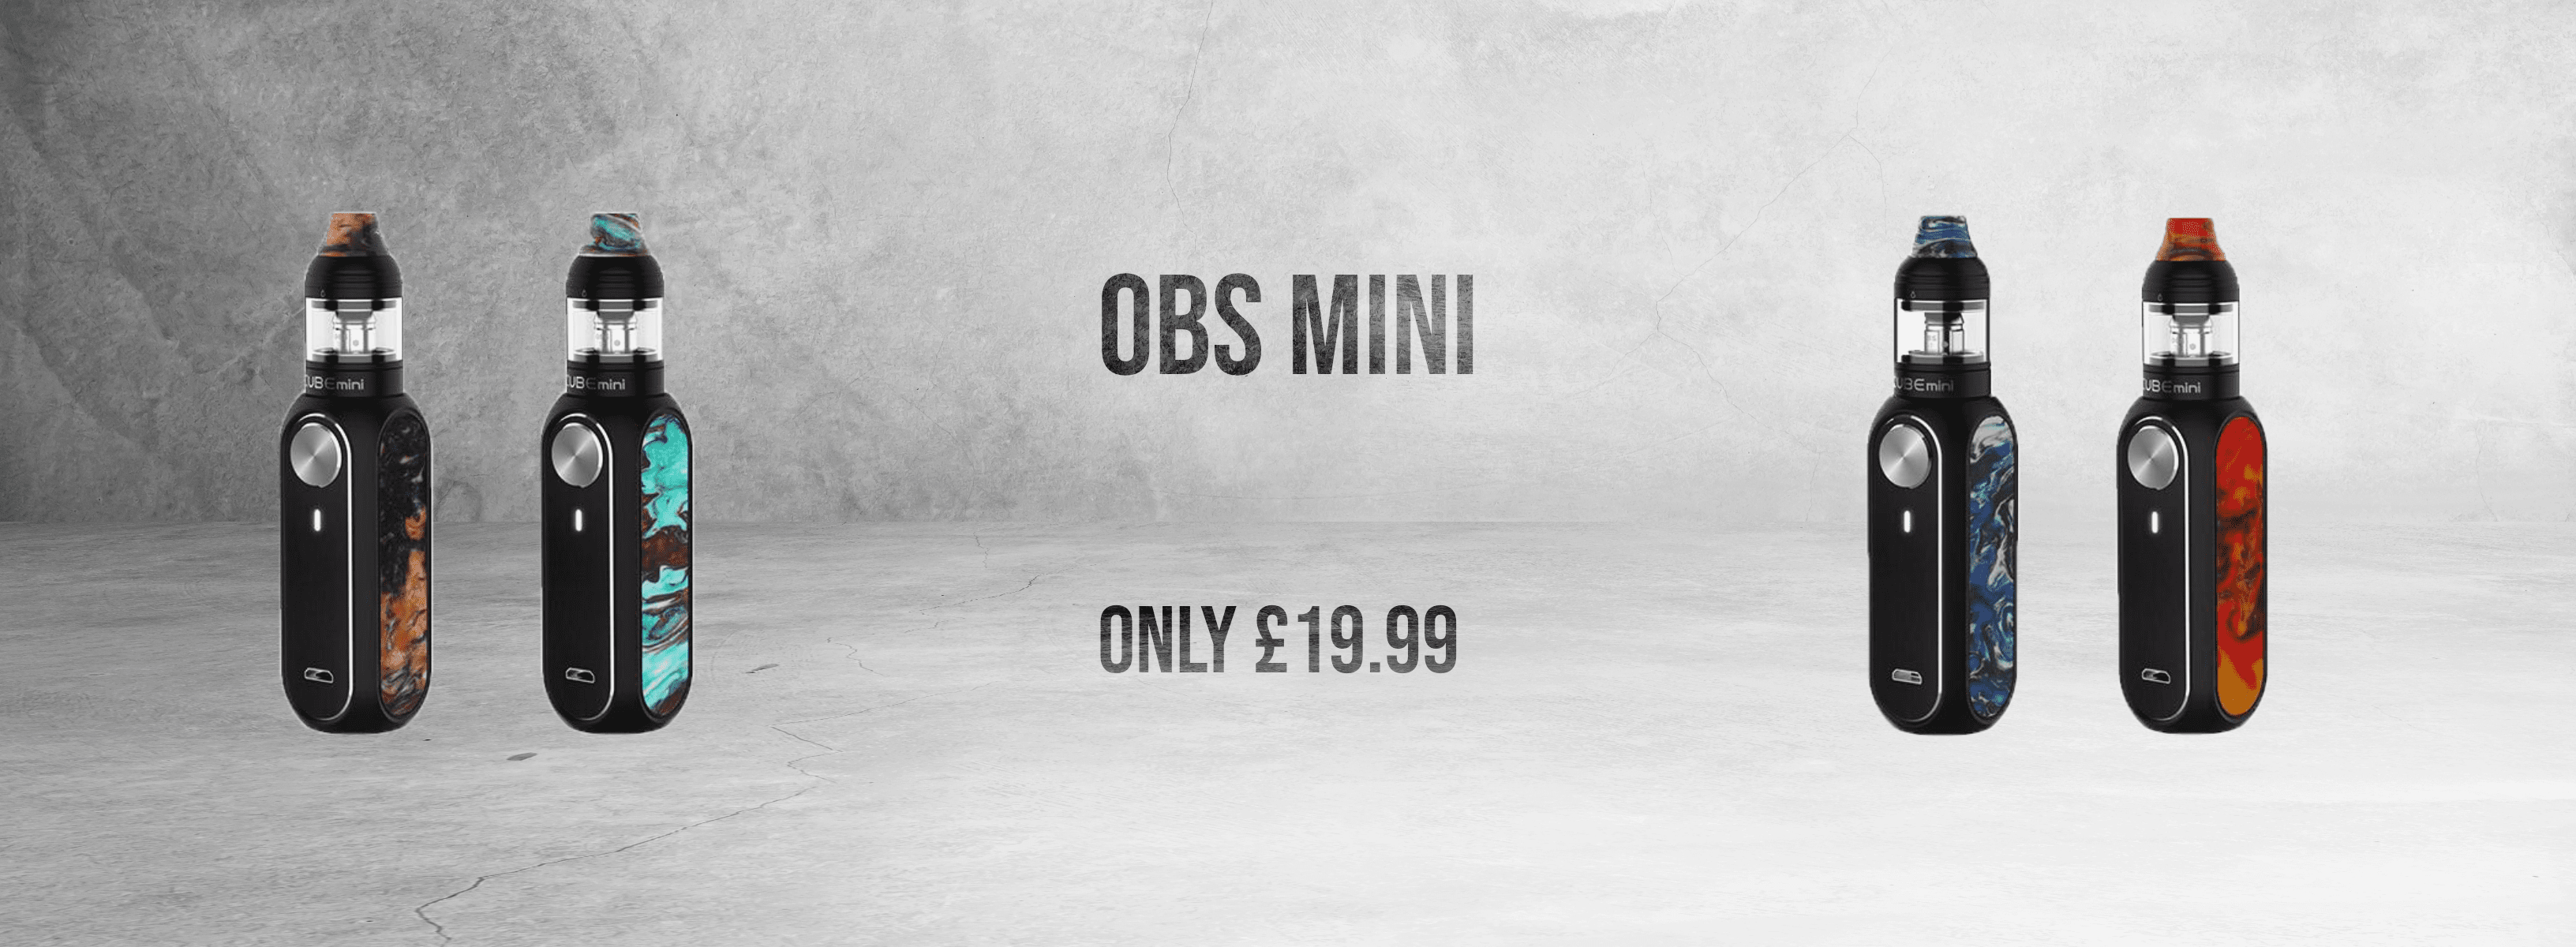 Advert for the OBS Mini